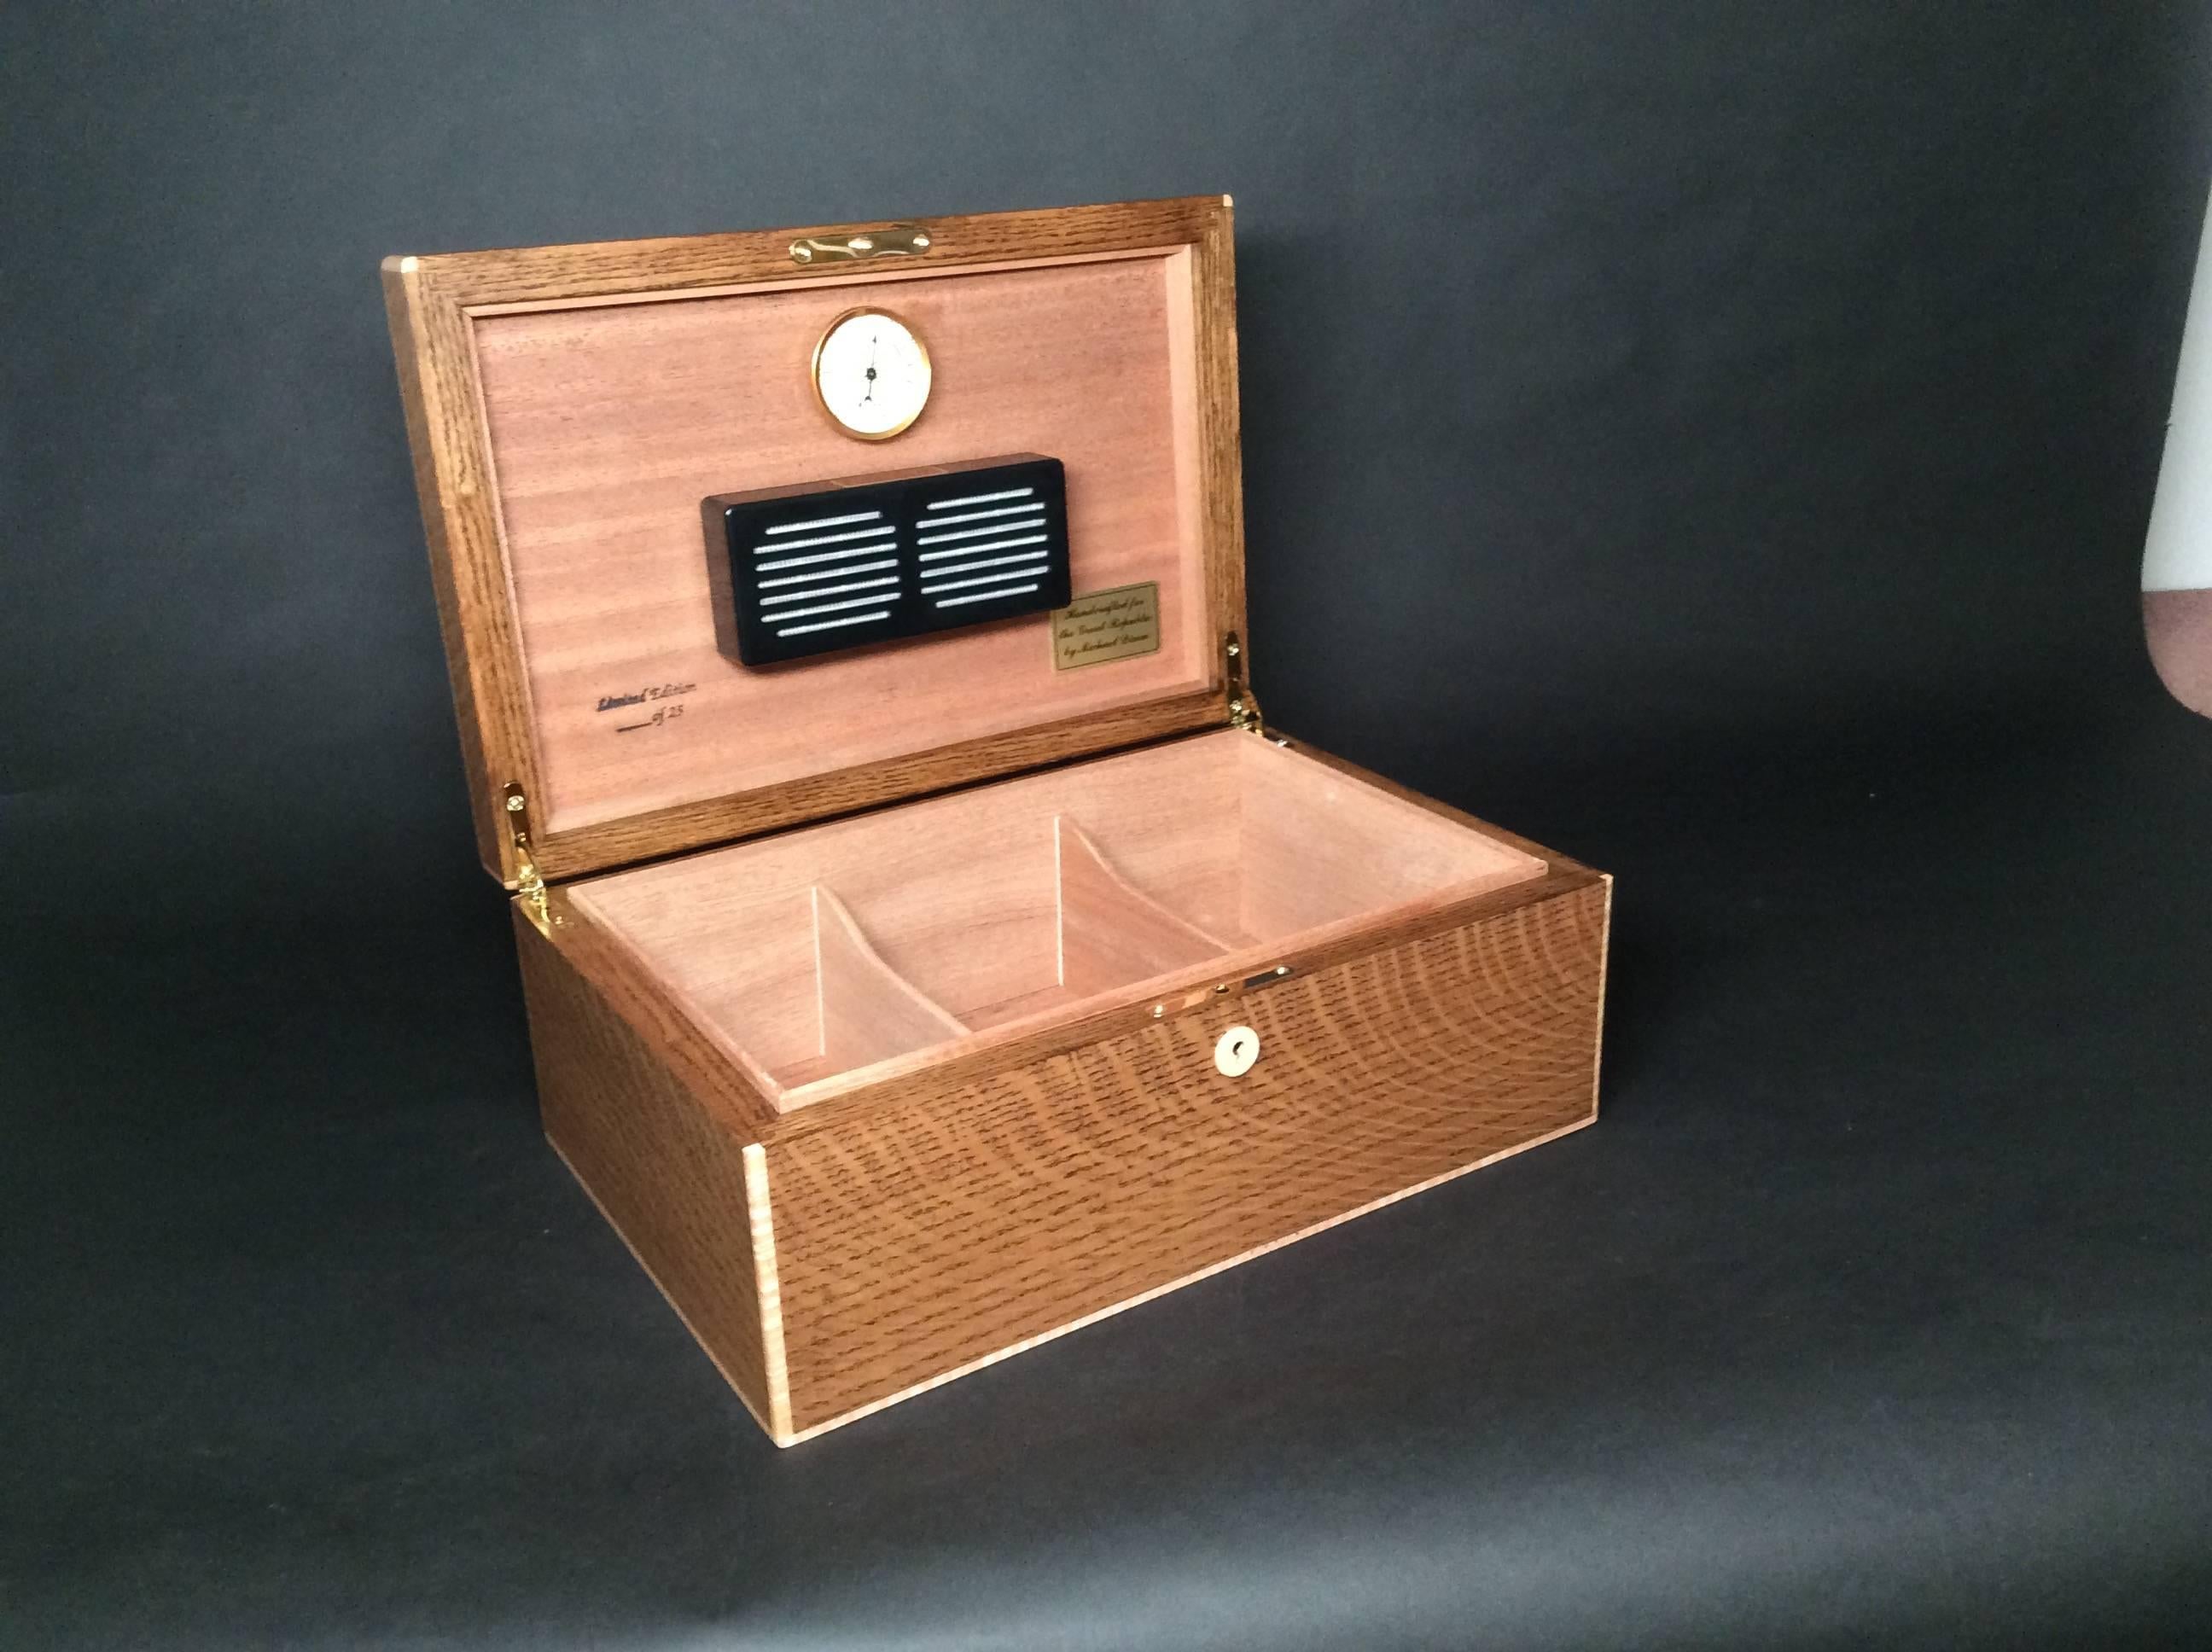 A handsome handcrafted cigar humidor, made from heart pine. This humidor is an exclusive product to The Great Republic, created in a limited edition of only 25. The lid of this distinctive humidor is hand-stamped with an elephant, complete with